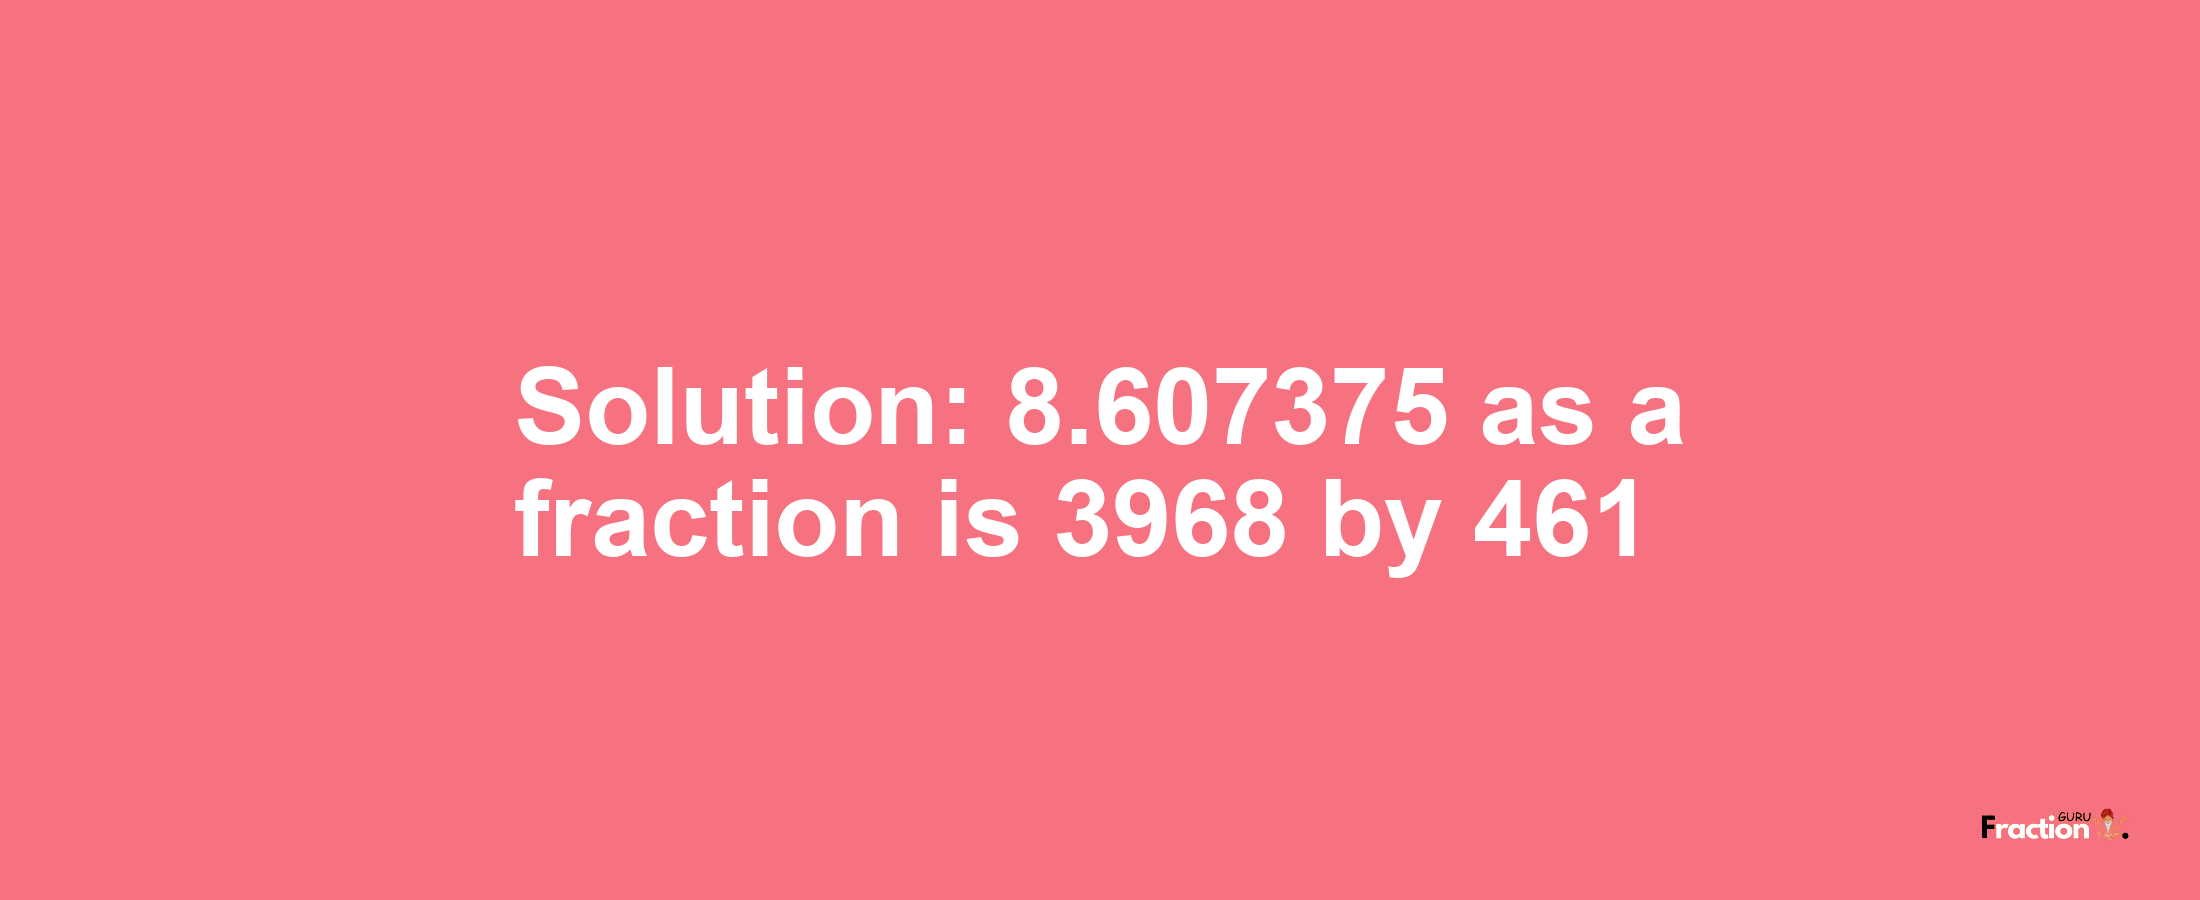 Solution:8.607375 as a fraction is 3968/461